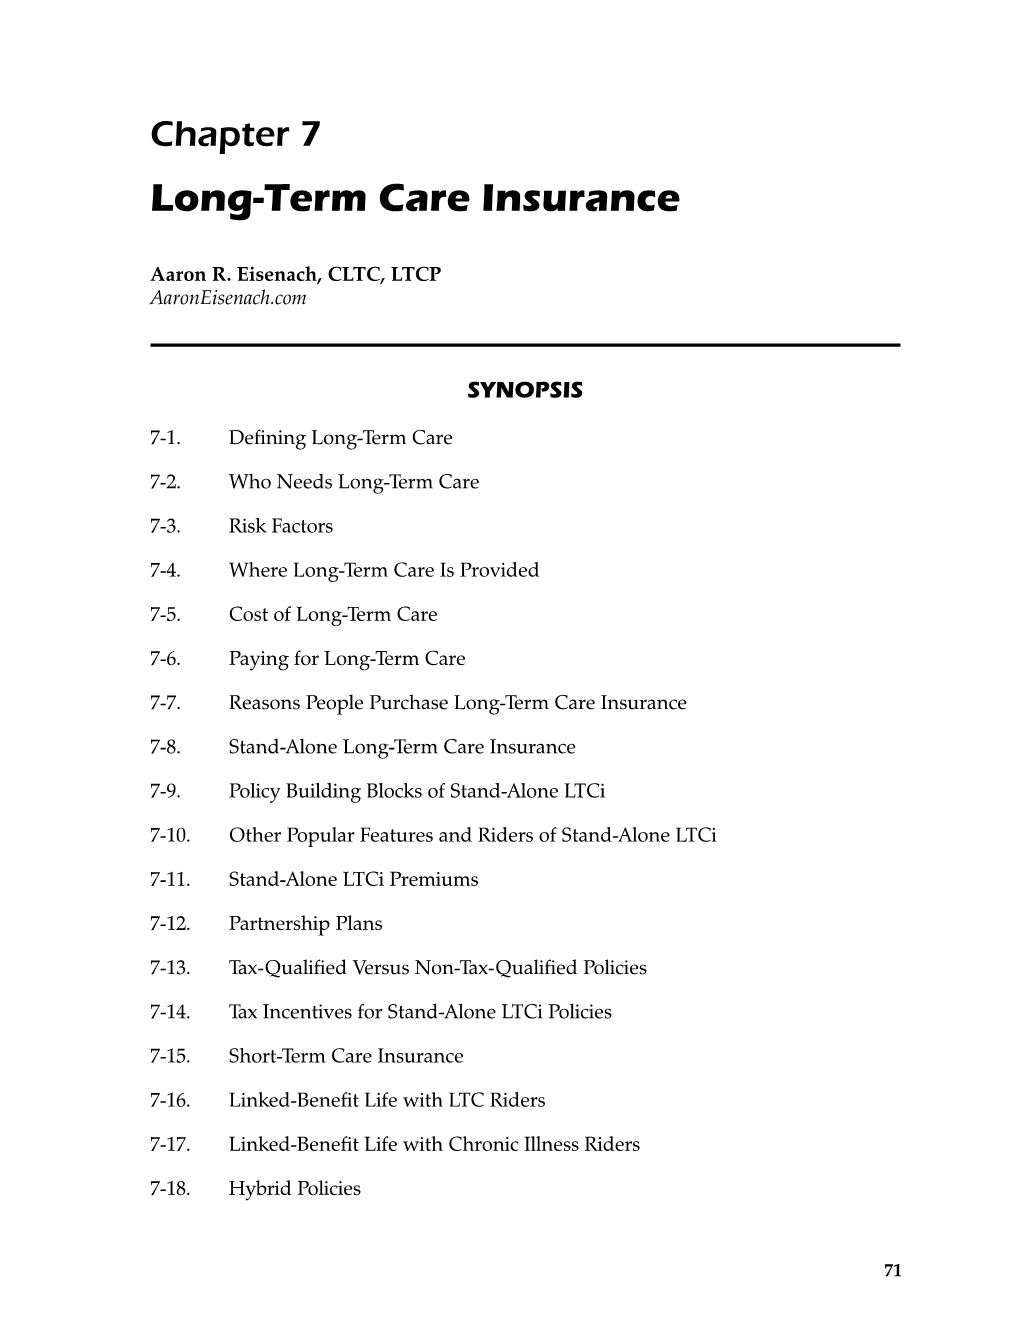 Chapter 7 Long-Term Care Insurance